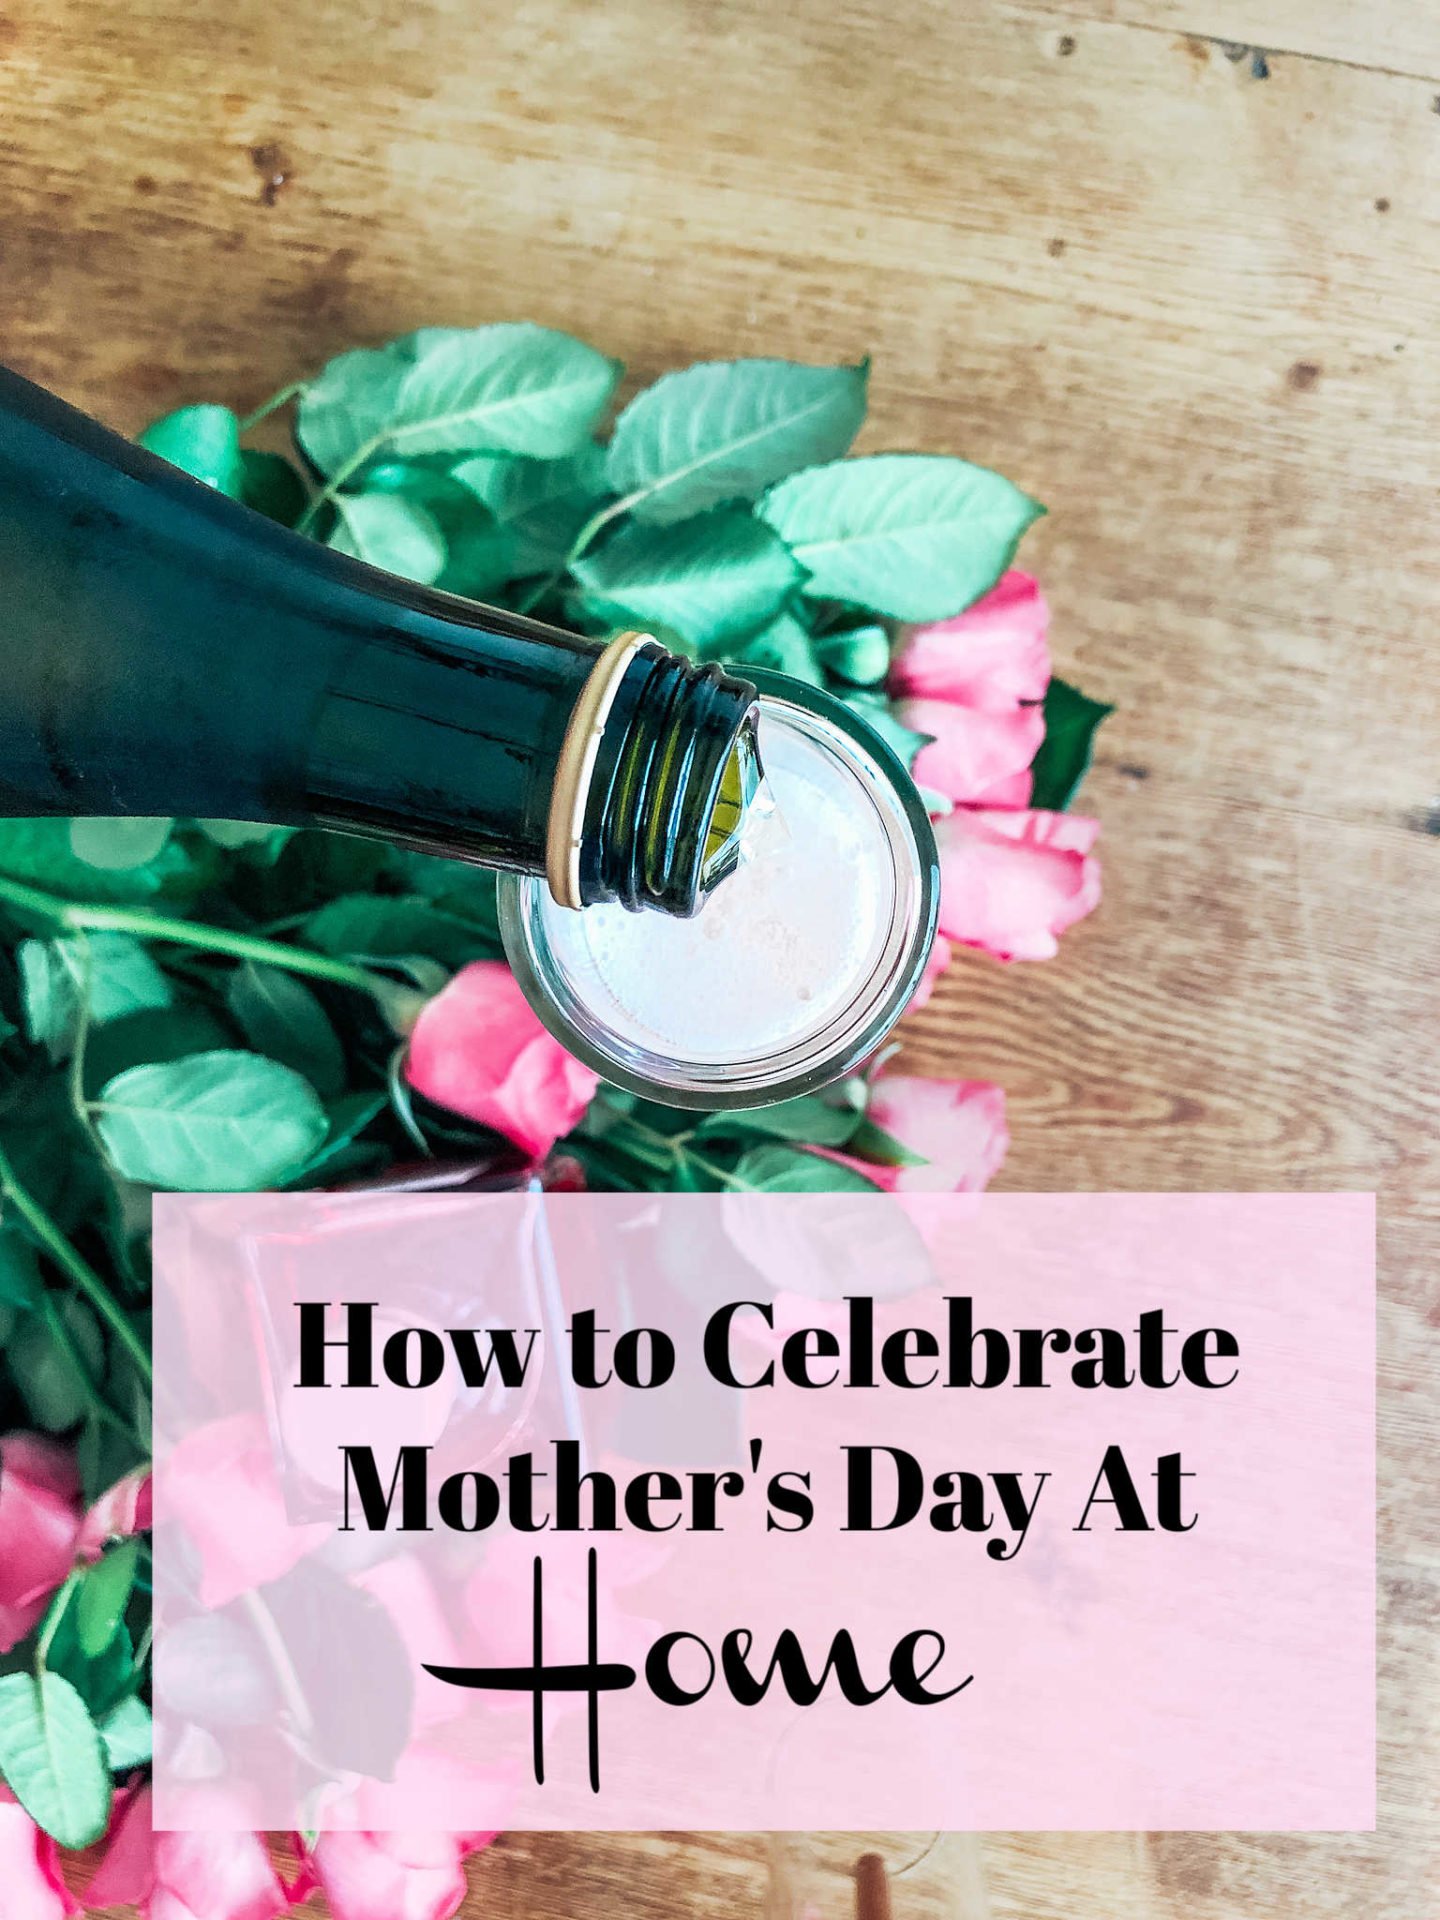 How to Celebrate Mothers Day At Home with a guide to creating a pampering day for your mum and lots of family time. -2